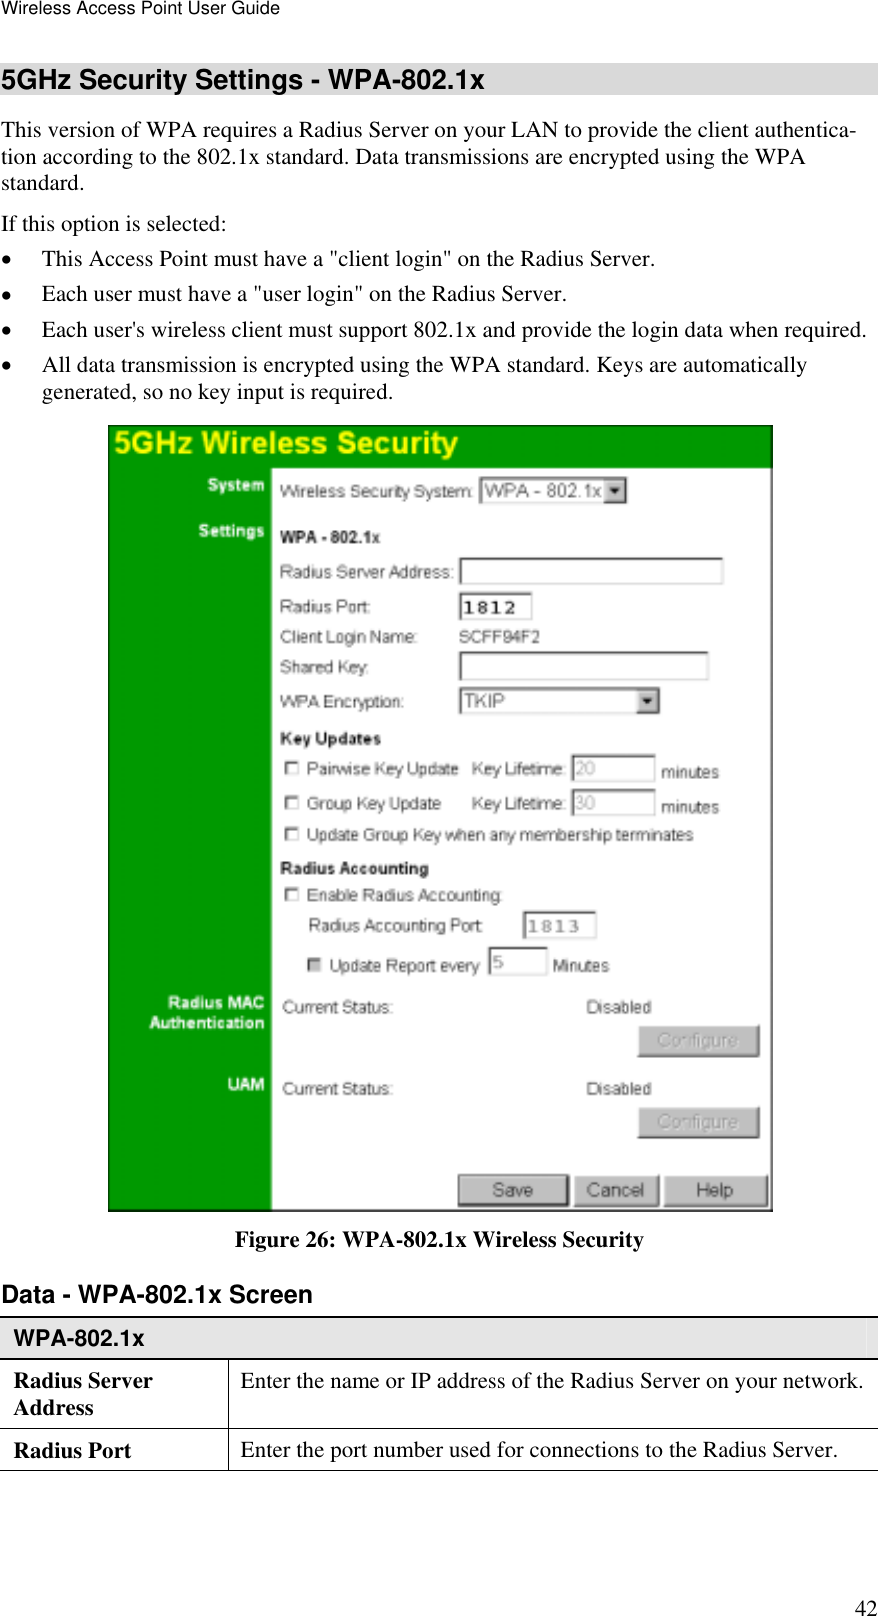 Wireless Access Point User Guide 42 5GHz Security Settings - WPA-802.1x This version of WPA requires a Radius Server on your LAN to provide the client authentica-tion according to the 802.1x standard. Data transmissions are encrypted using the WPA standard.  If this option is selected: •  This Access Point must have a &quot;client login&quot; on the Radius Server.  •  Each user must have a &quot;user login&quot; on the Radius Server.  •  Each user&apos;s wireless client must support 802.1x and provide the login data when required.  •  All data transmission is encrypted using the WPA standard. Keys are automatically generated, so no key input is required.  Figure 26: WPA-802.1x Wireless Security Data - WPA-802.1x Screen  WPA-802.1x Radius Server  Address  Enter the name or IP address of the Radius Server on your network.Radius Port  Enter the port number used for connections to the Radius Server. 